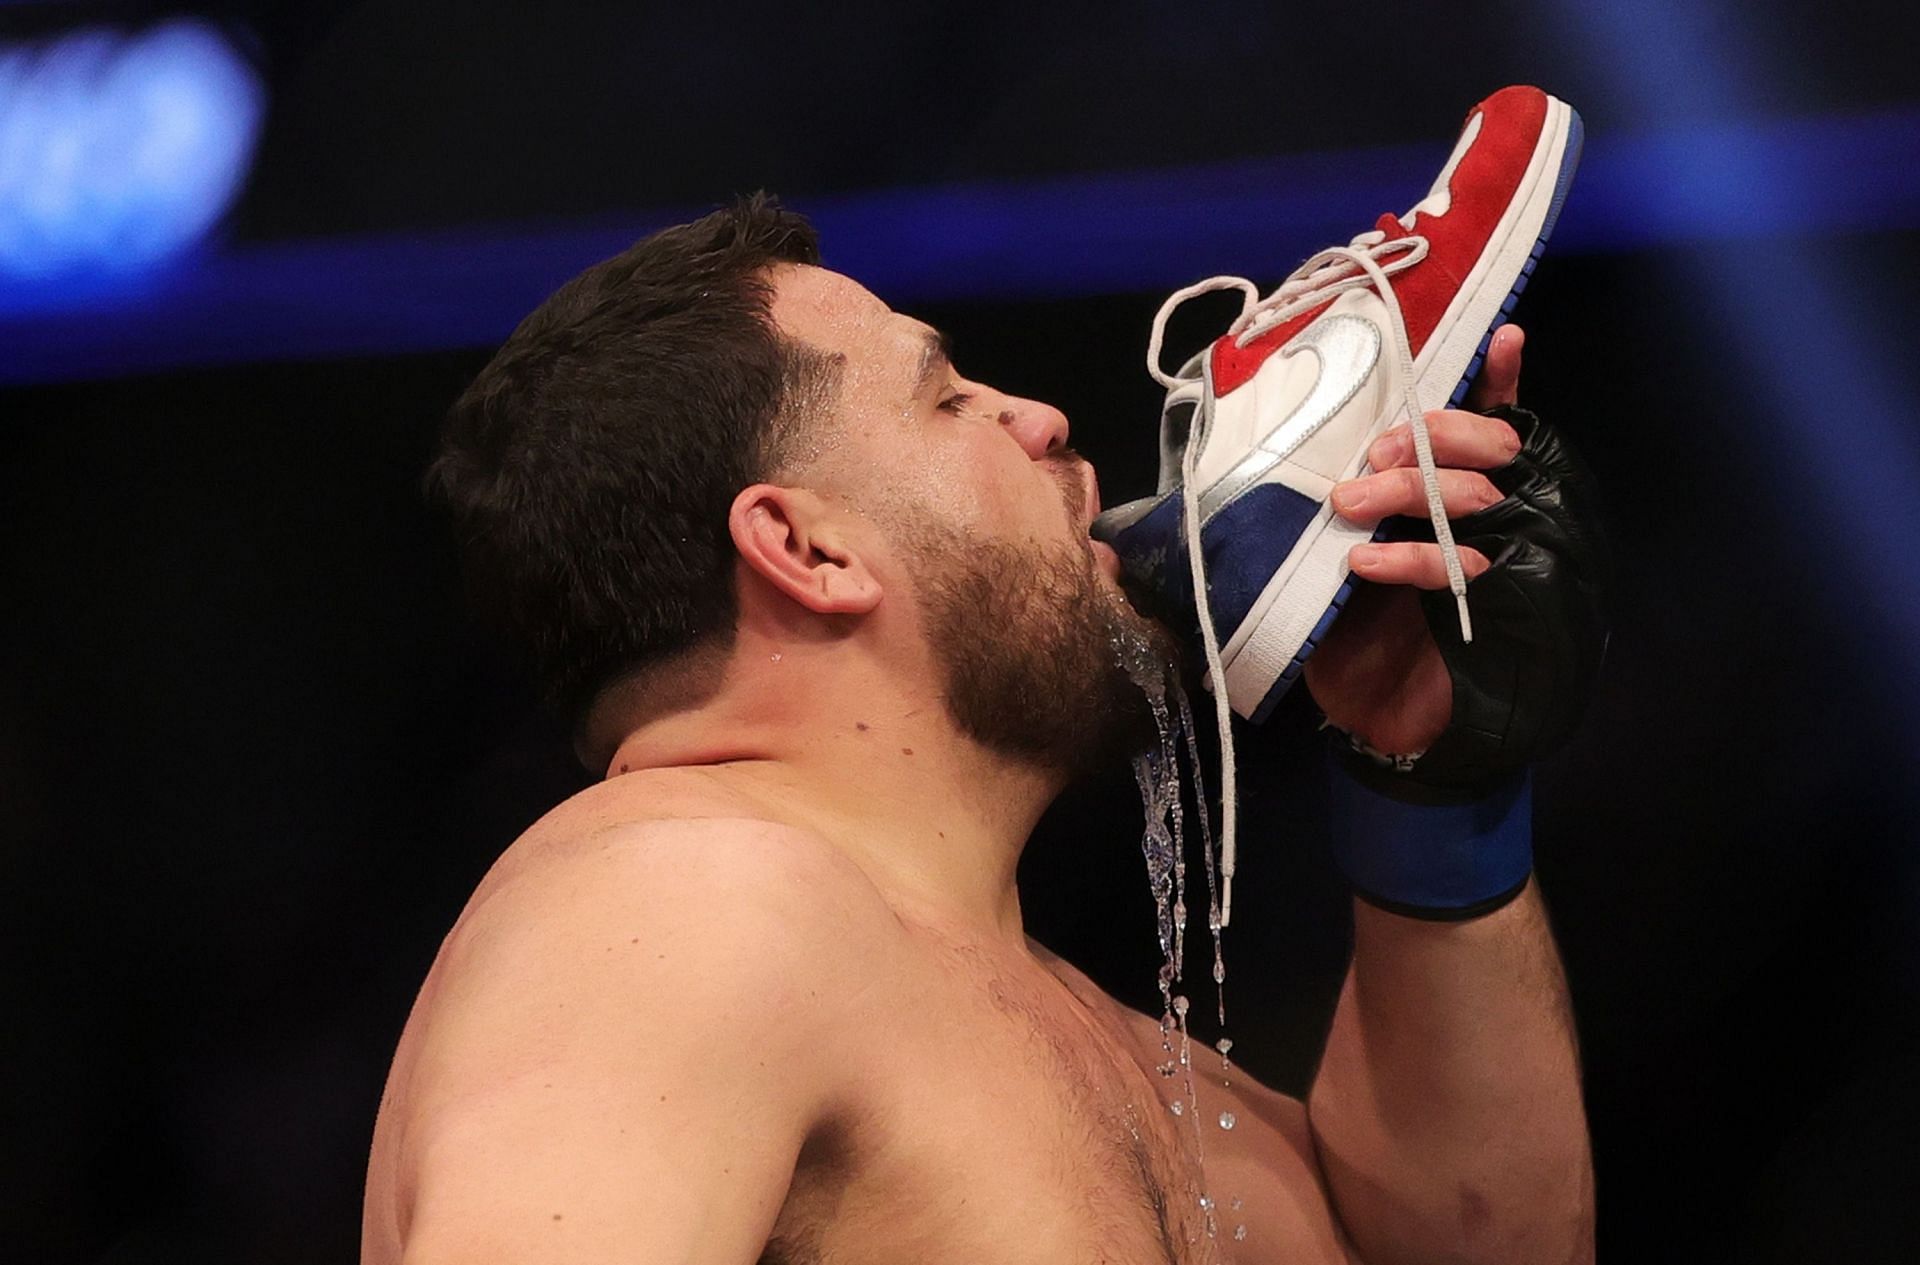 Will Tai Tuivasa be celebrating with a shoey after he faces Derrick Lewis in February?